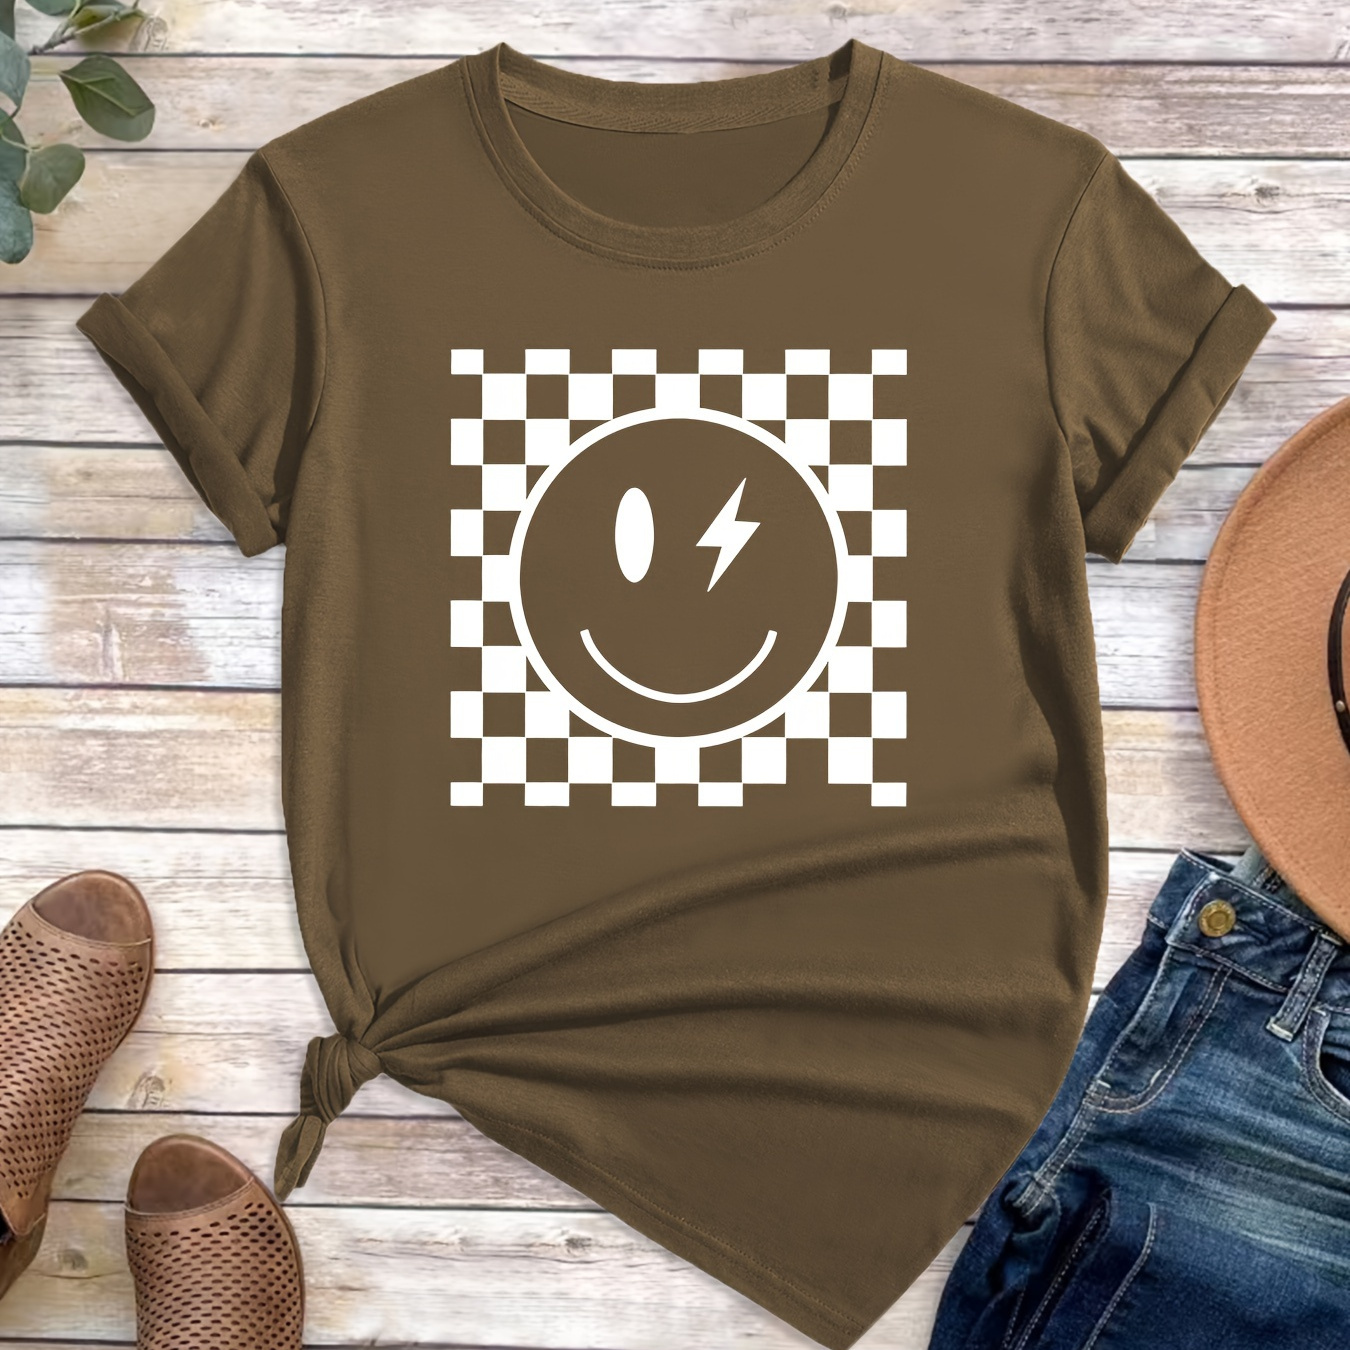 

Smiling Face & Checkerboard Print Casual T-shirt, Crew Neck Short Sleeves Sports Tee, Women's Comfy Tops